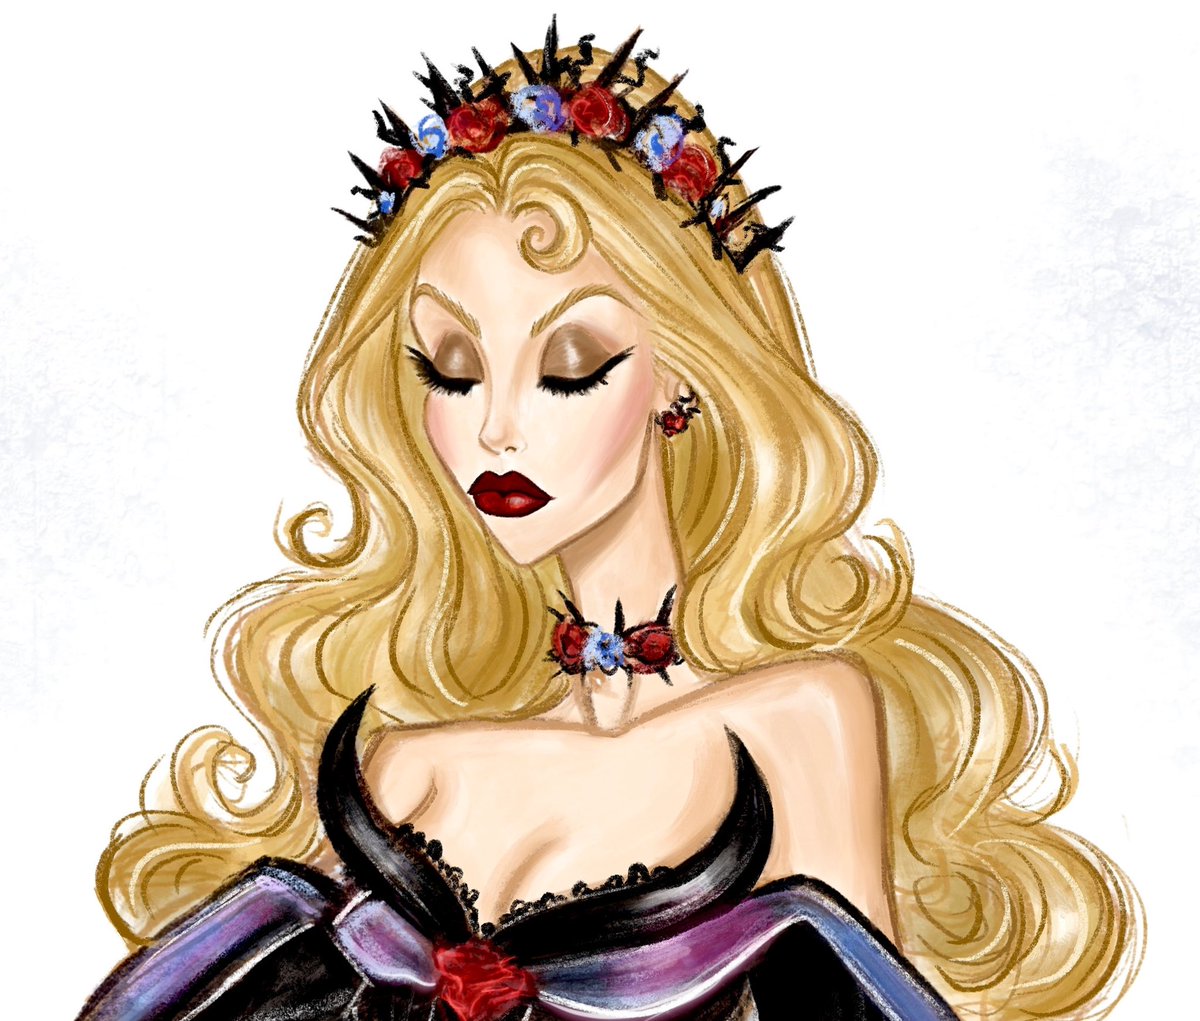 #SleepingBeauty 🌹💋 With this years #MetGala theme named ‘Sleeping Beauties: Reawakening Fashion”, I thought I would do something taking literal inspo from the title, & create a design for #PrincessAurora as if she were attending. Even though the theme isn’t fairytales, I